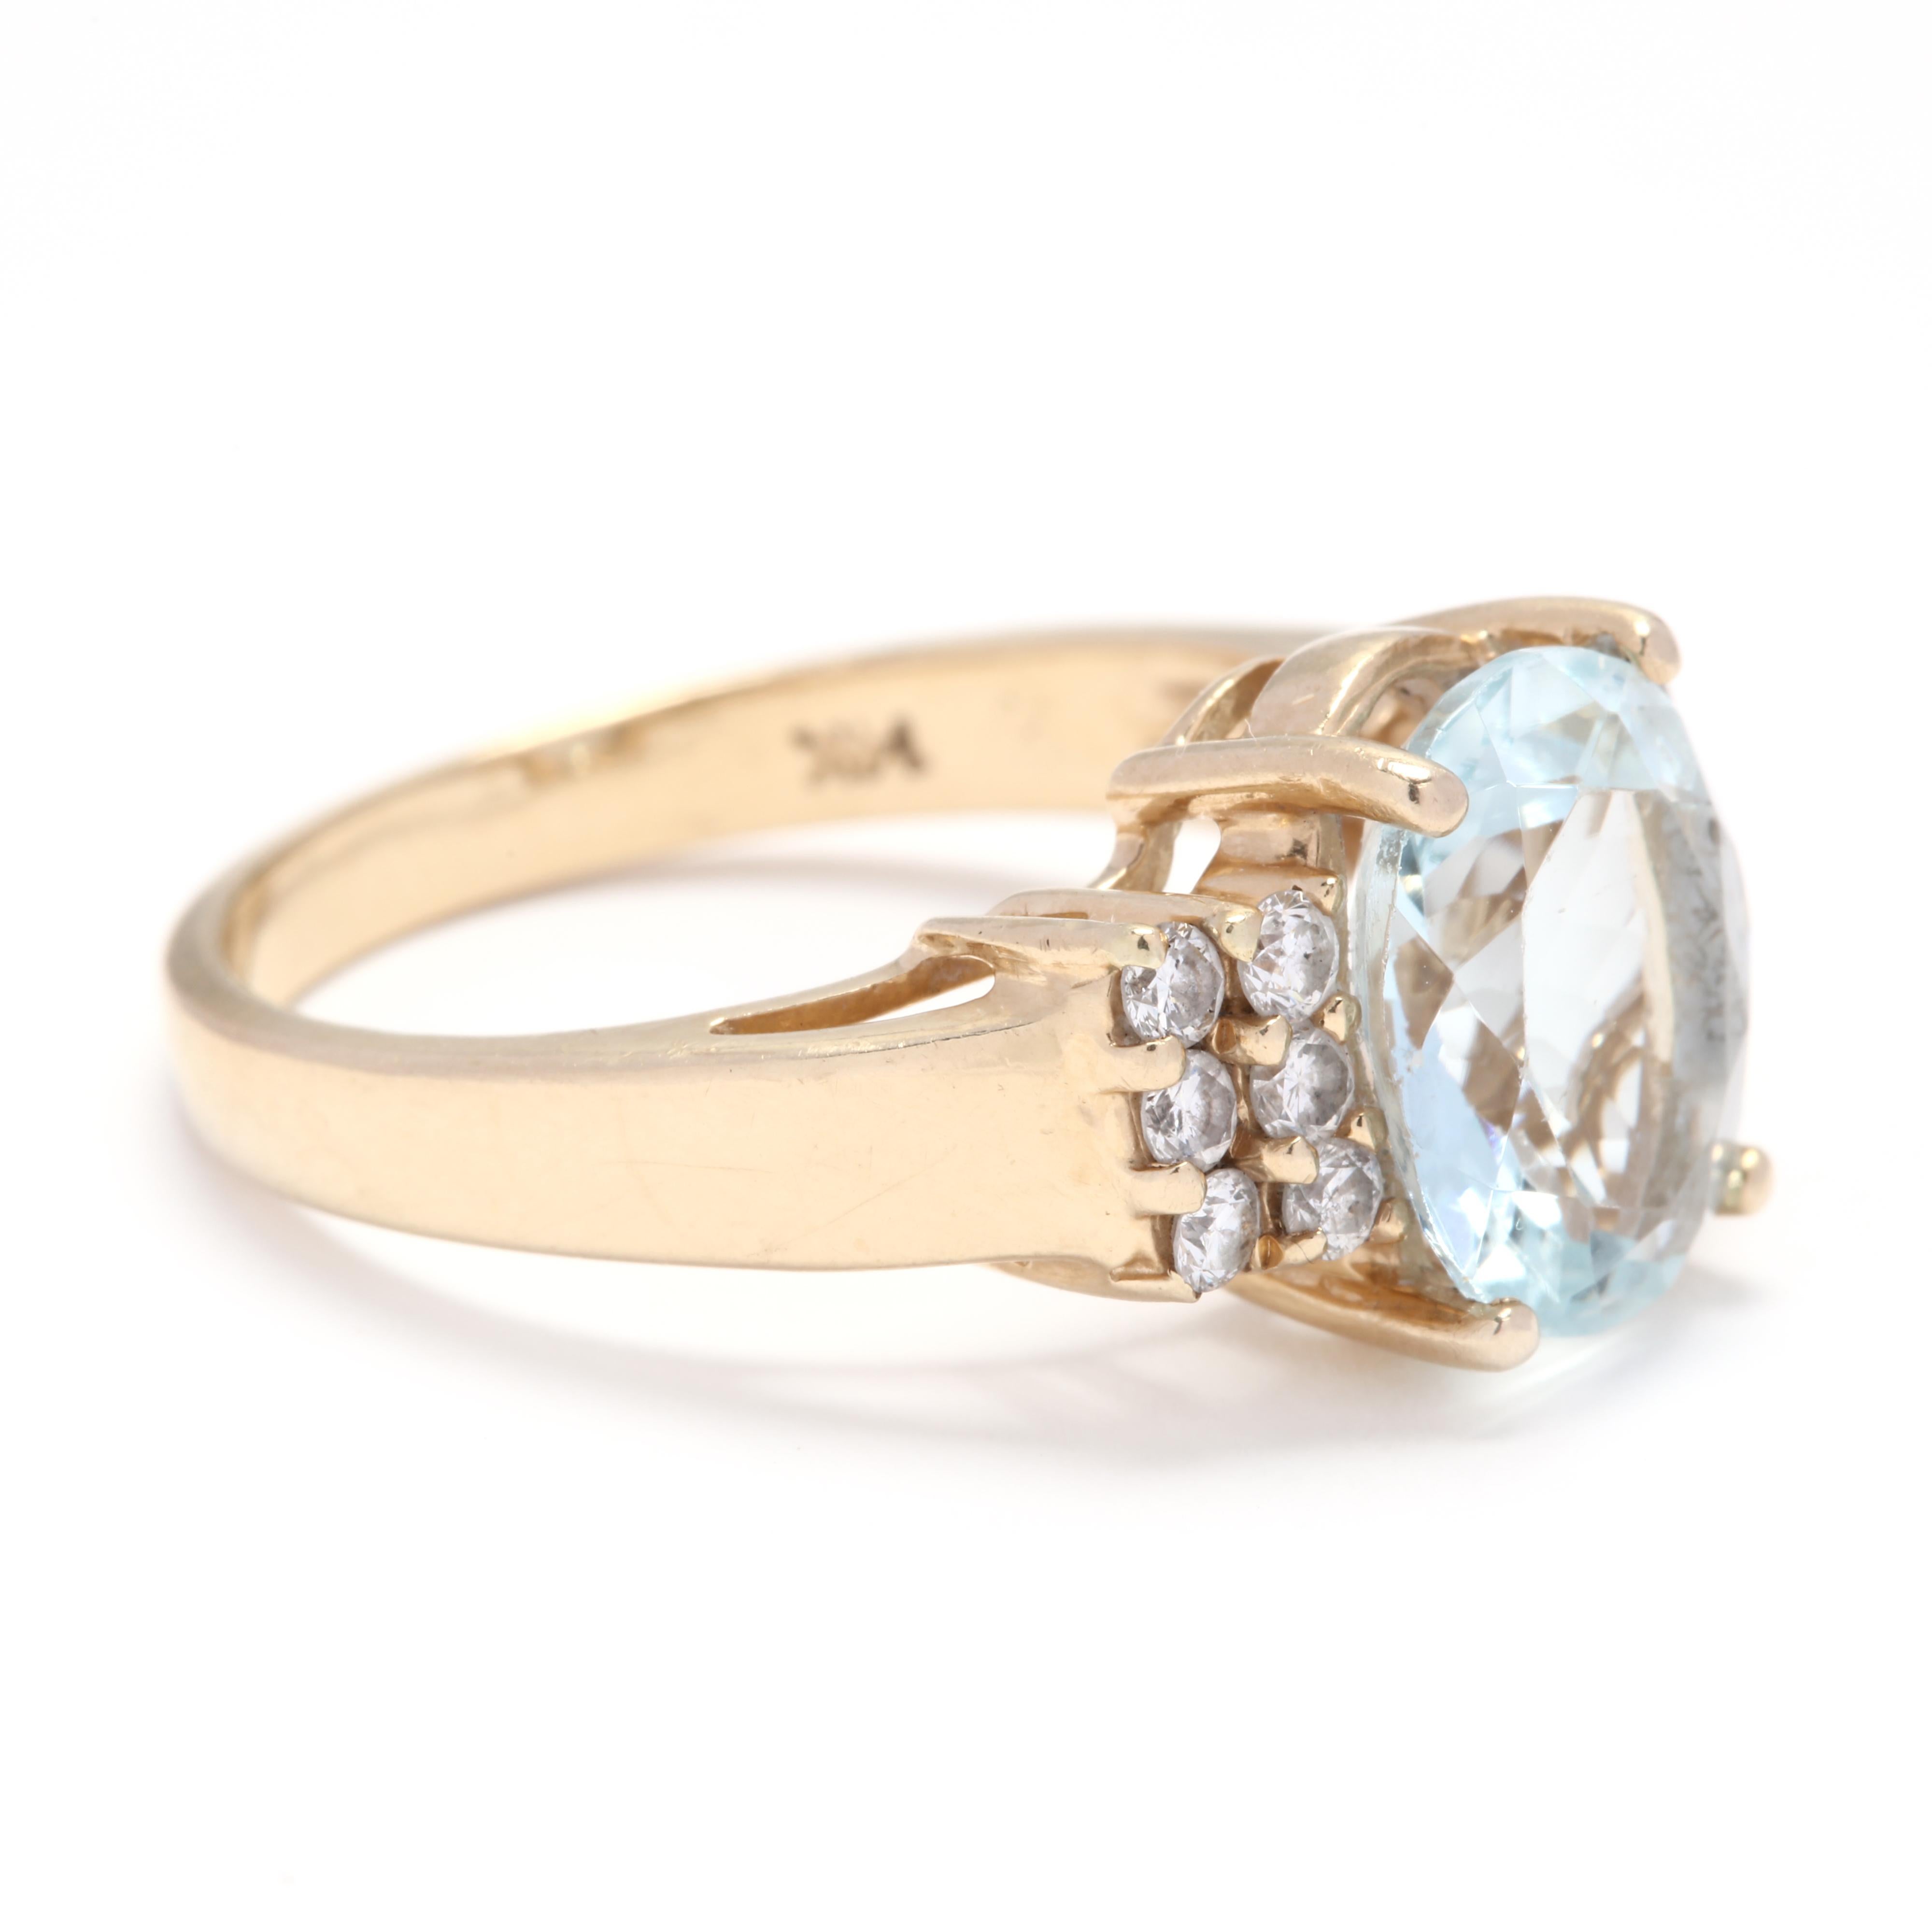 A 14 karat yellow gold, aquamarine and diamond ring. This ring features a prong set, oval cut light blue aquamarine with two rows of full cut round diamonds on either side and a slightly tapered shank. A beautiful something blue! 

Stones:
-